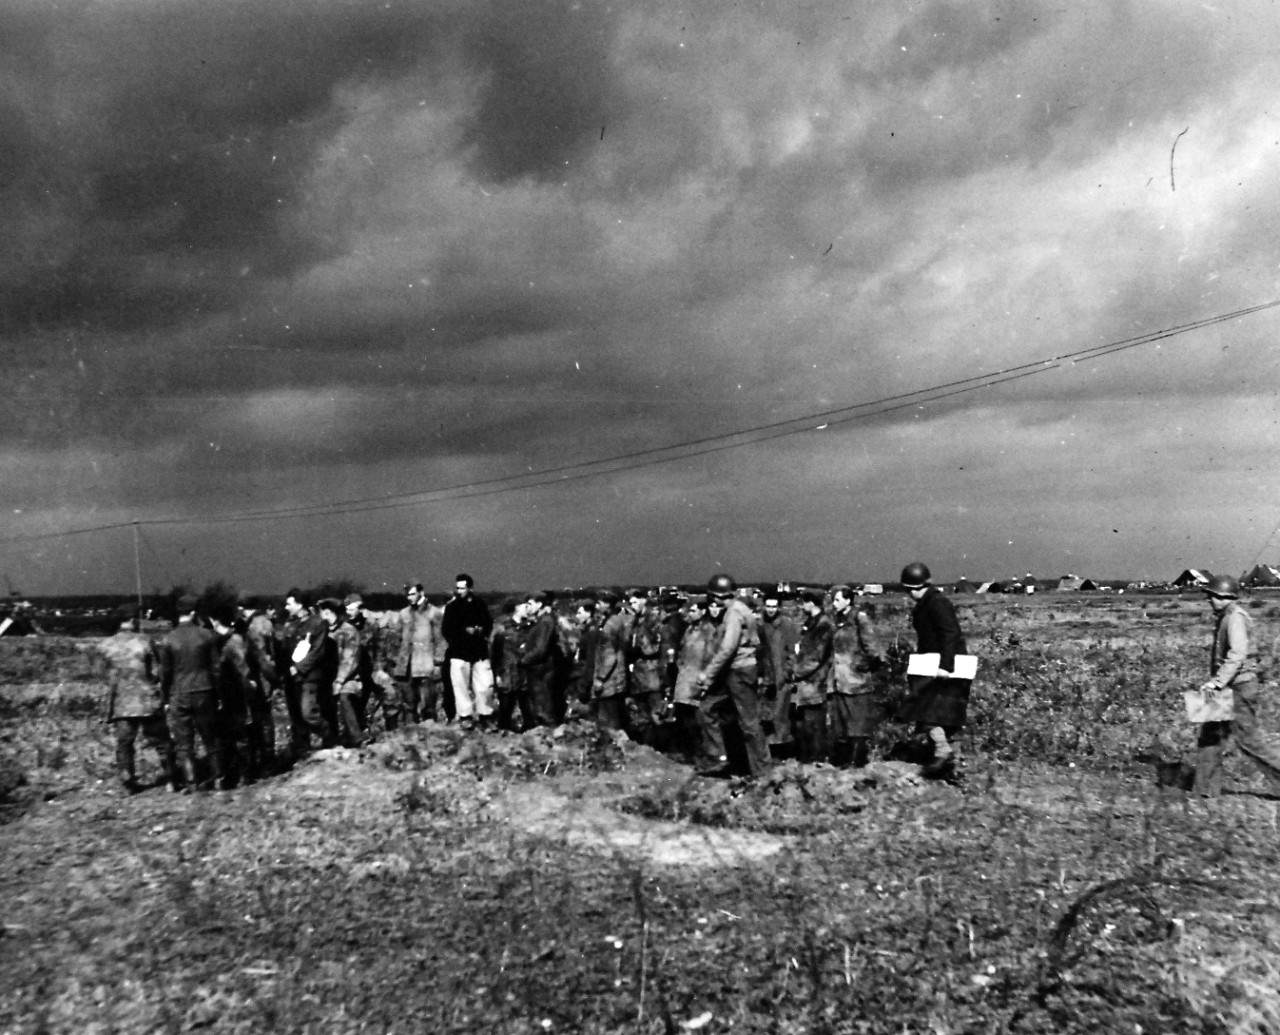 80-G-54403:     Battle of Anzio, January-June 1944.   German Prisoners seized by the 5th Army after the landing below Rome.  Most of the German garrison protecting this part of the Italian coast had been withdrawn.  German soldiers are shown.   Photograph released February 3, 1944.  Official  U.S. Navy photograph, now in the collections of the National Archives.  (2016/06/28).